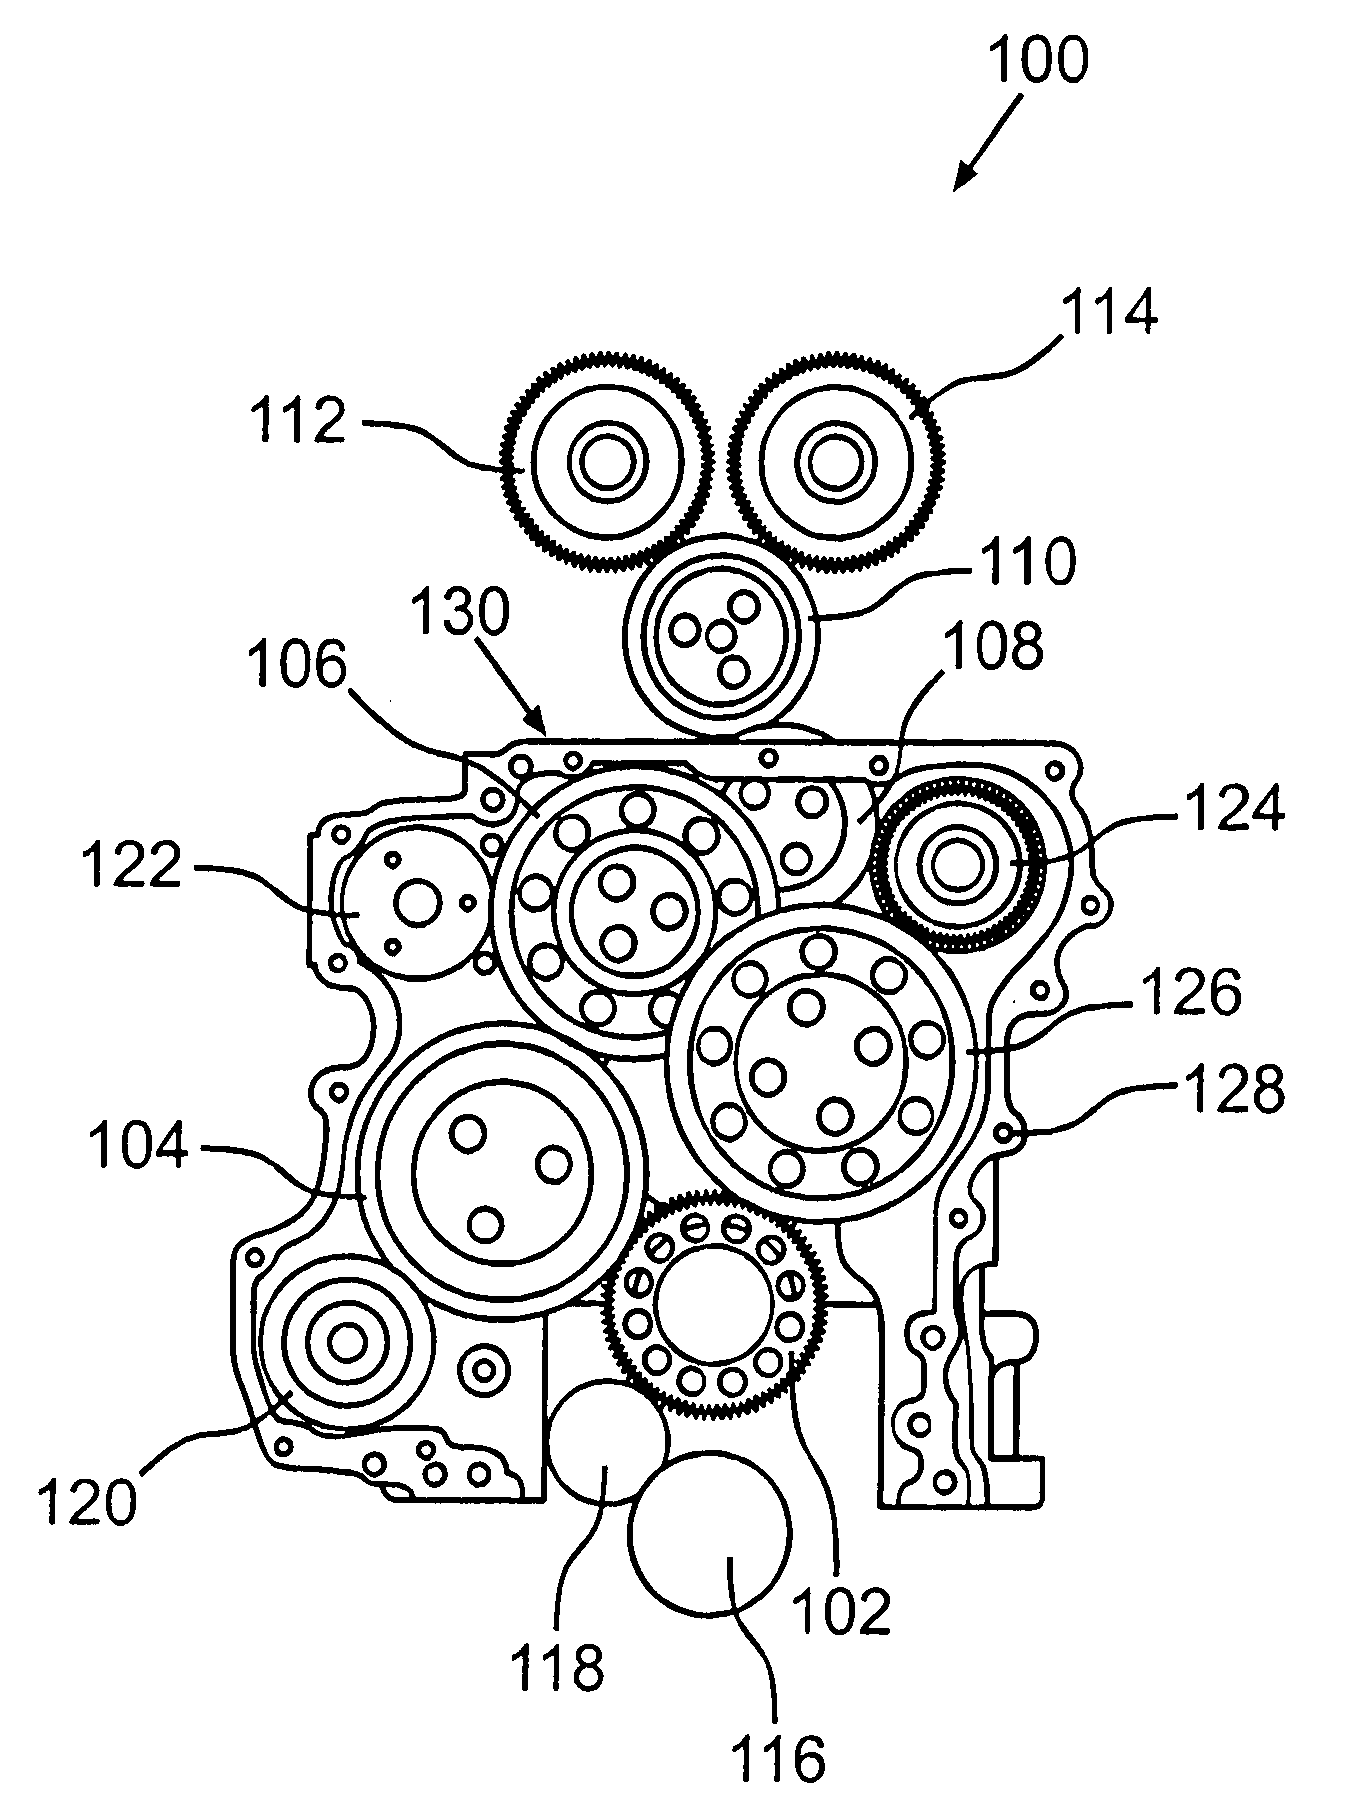 Spur gear drive for an internal combustion engine